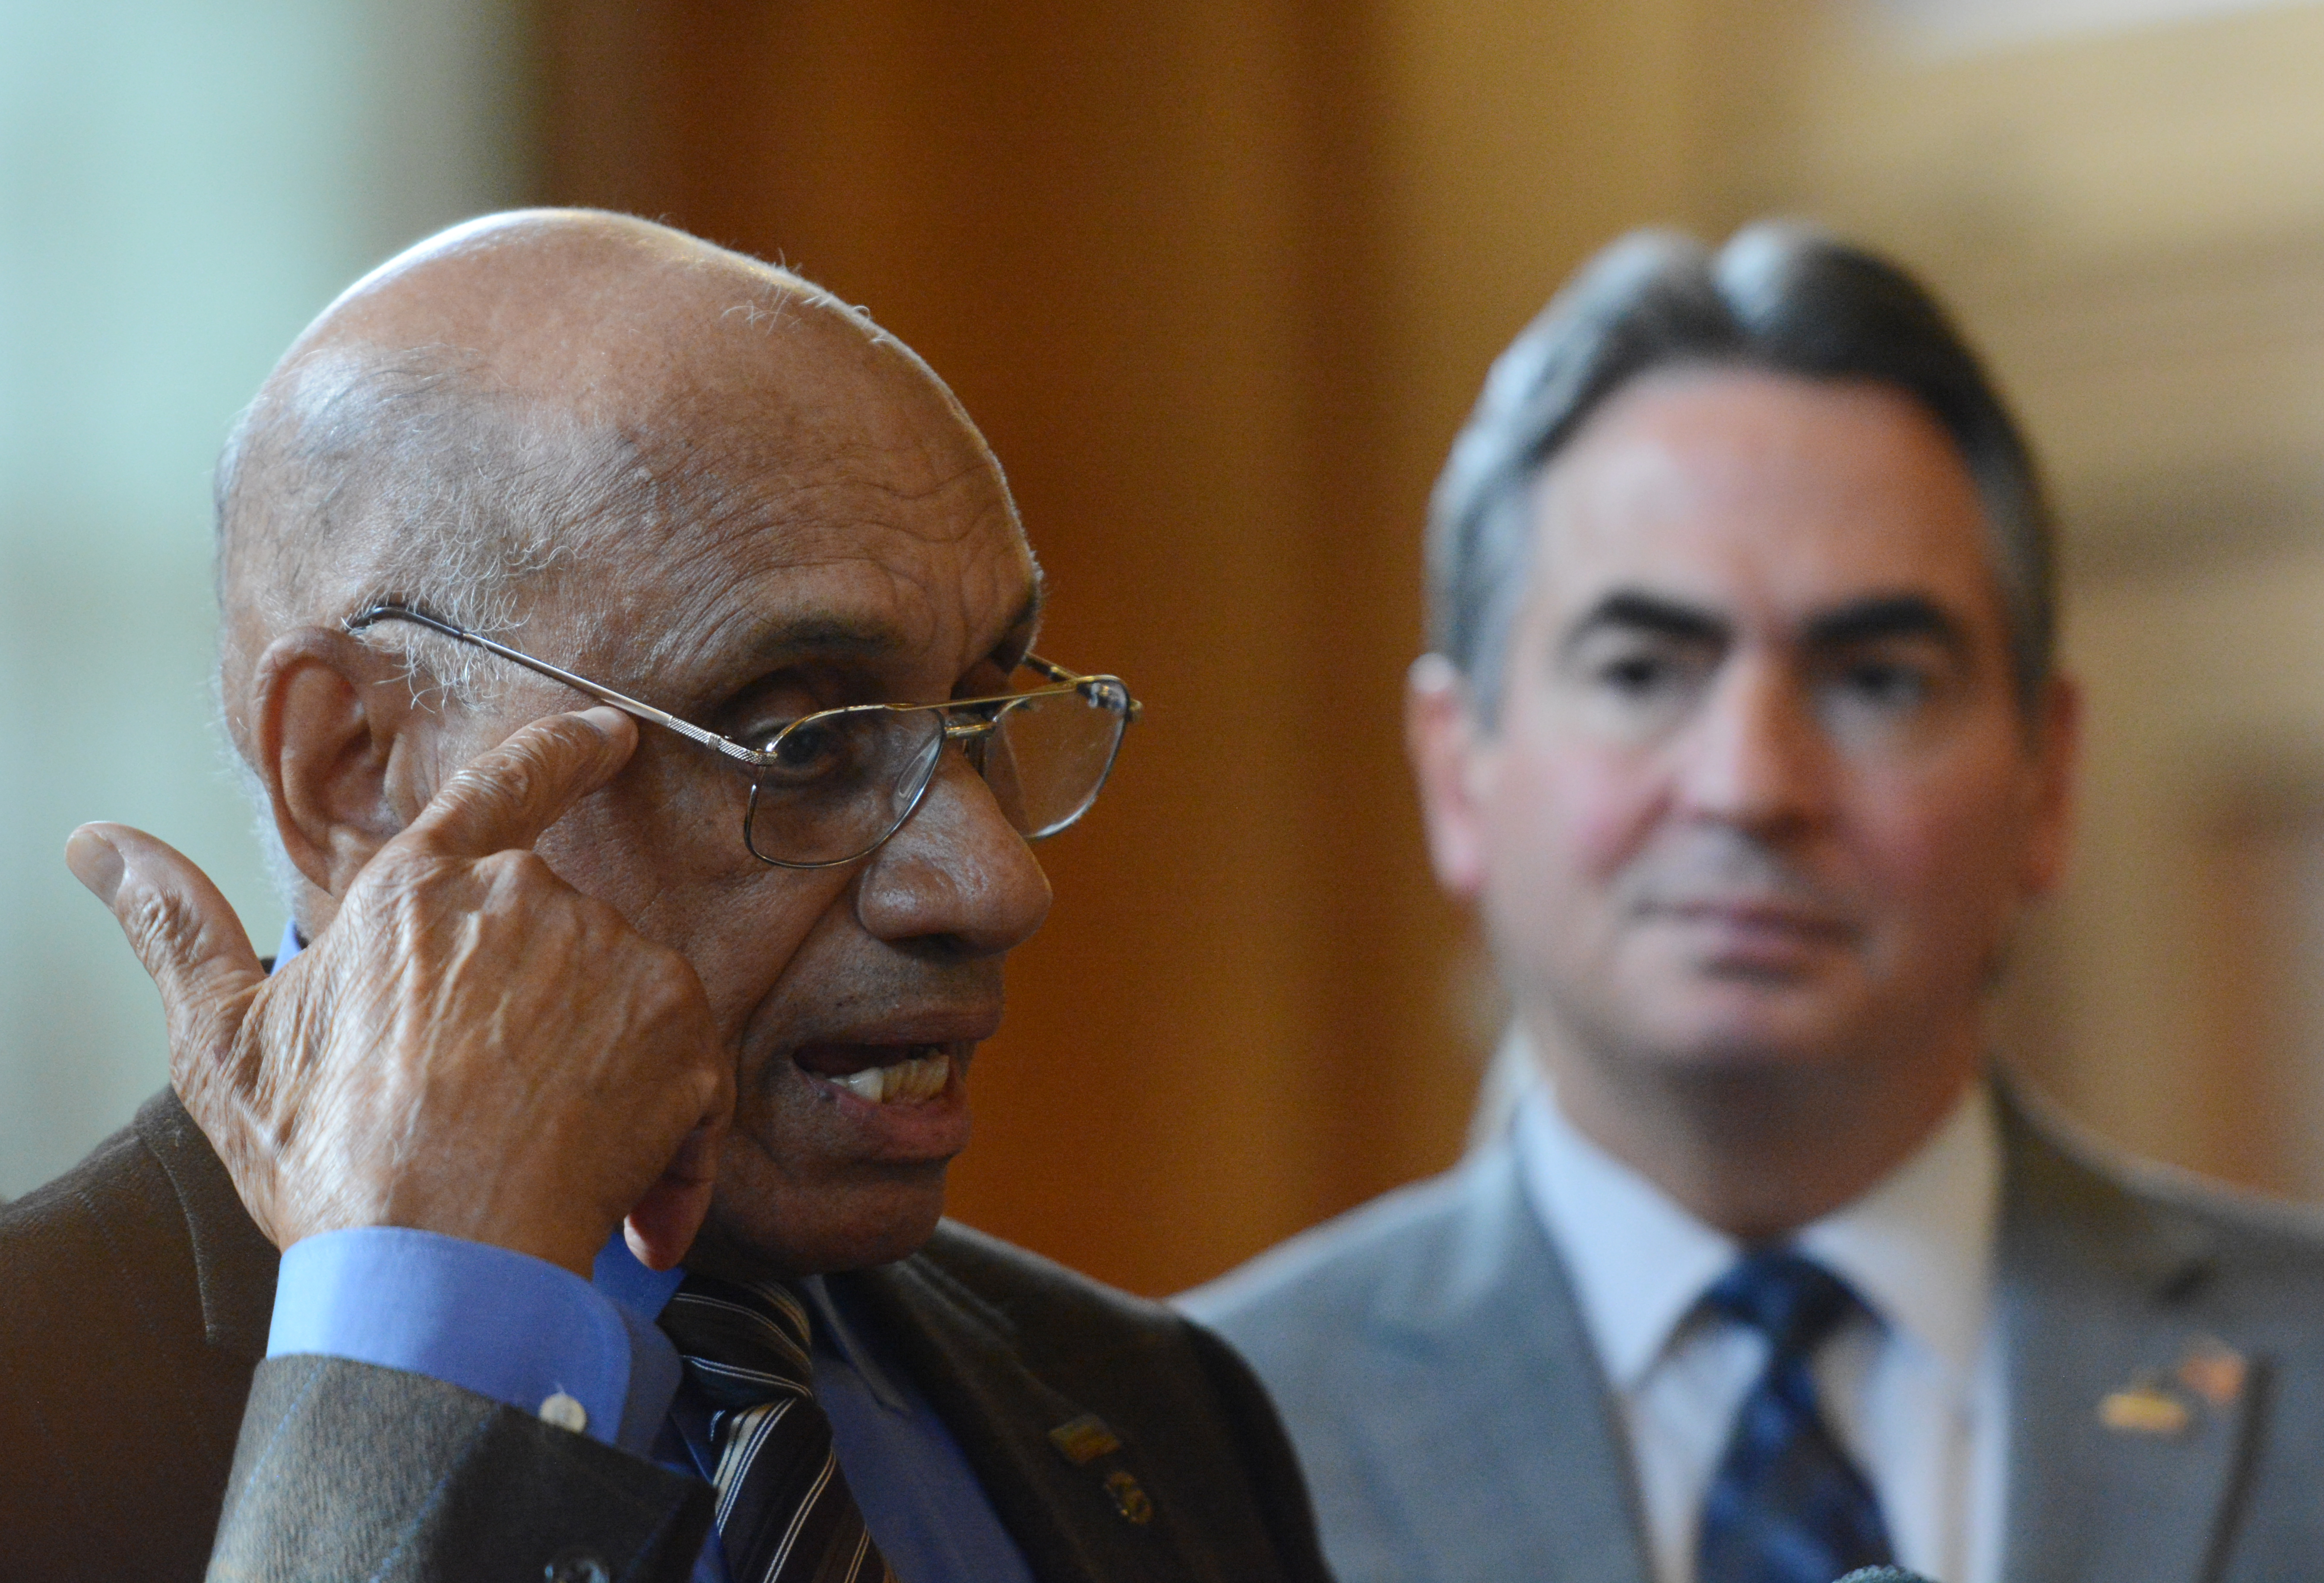 After breaking color barrier in hockey, Willie O'Ree's number to be retired